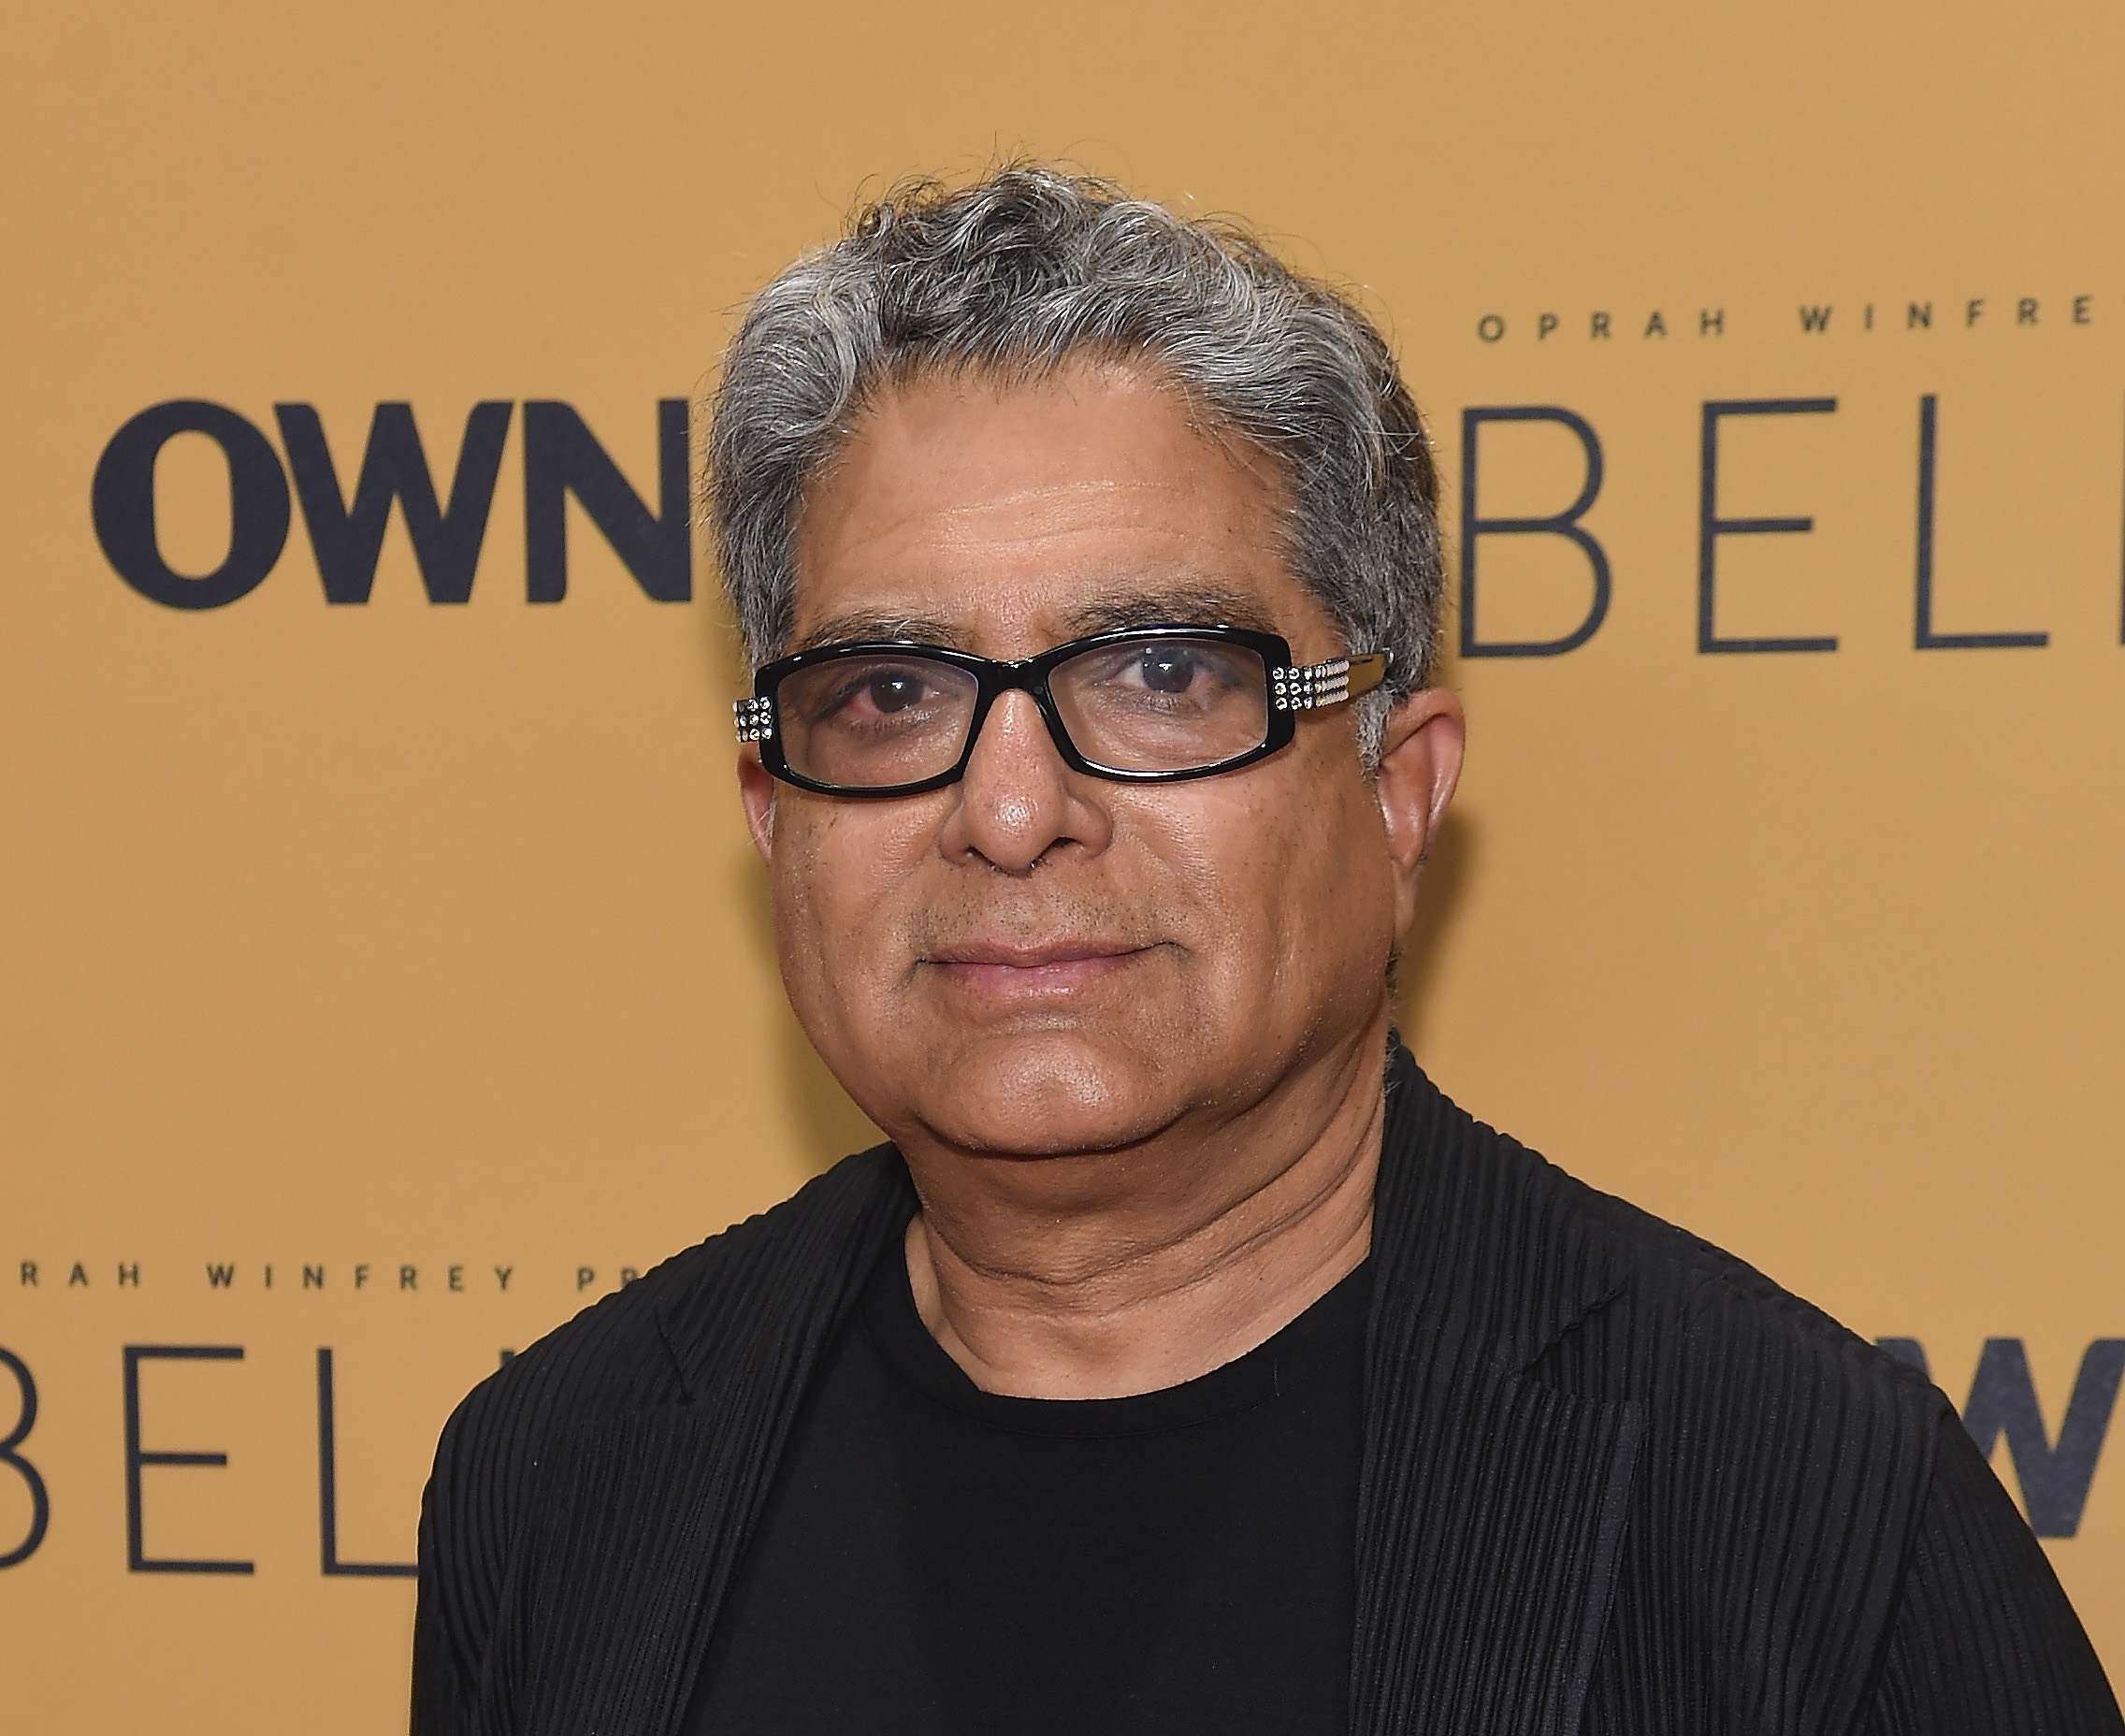 Spiritual leader Dr. Deepak Chopra attends the "Belief" New York premiere at TheTimesCenter on October 14, 2015 in New York City.